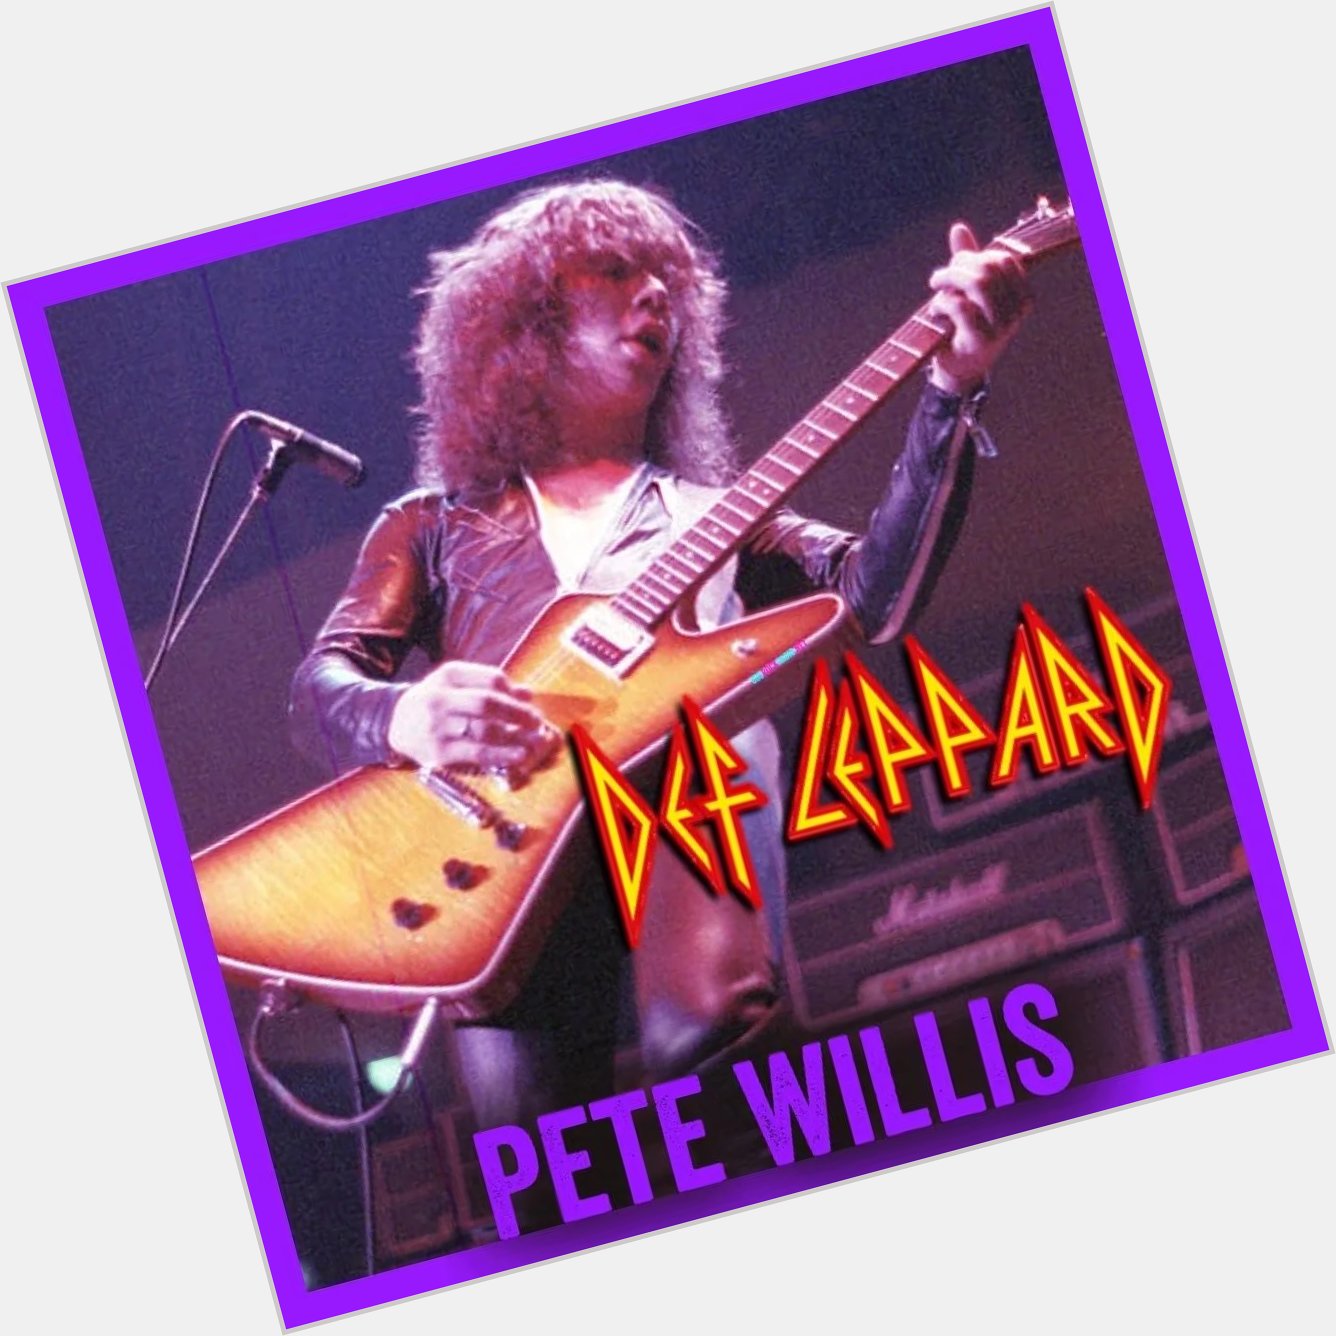 Happy Birthday Pete Willis 
Guitarist for Def Leppard 
February 16, 1960 Sheffield, England 